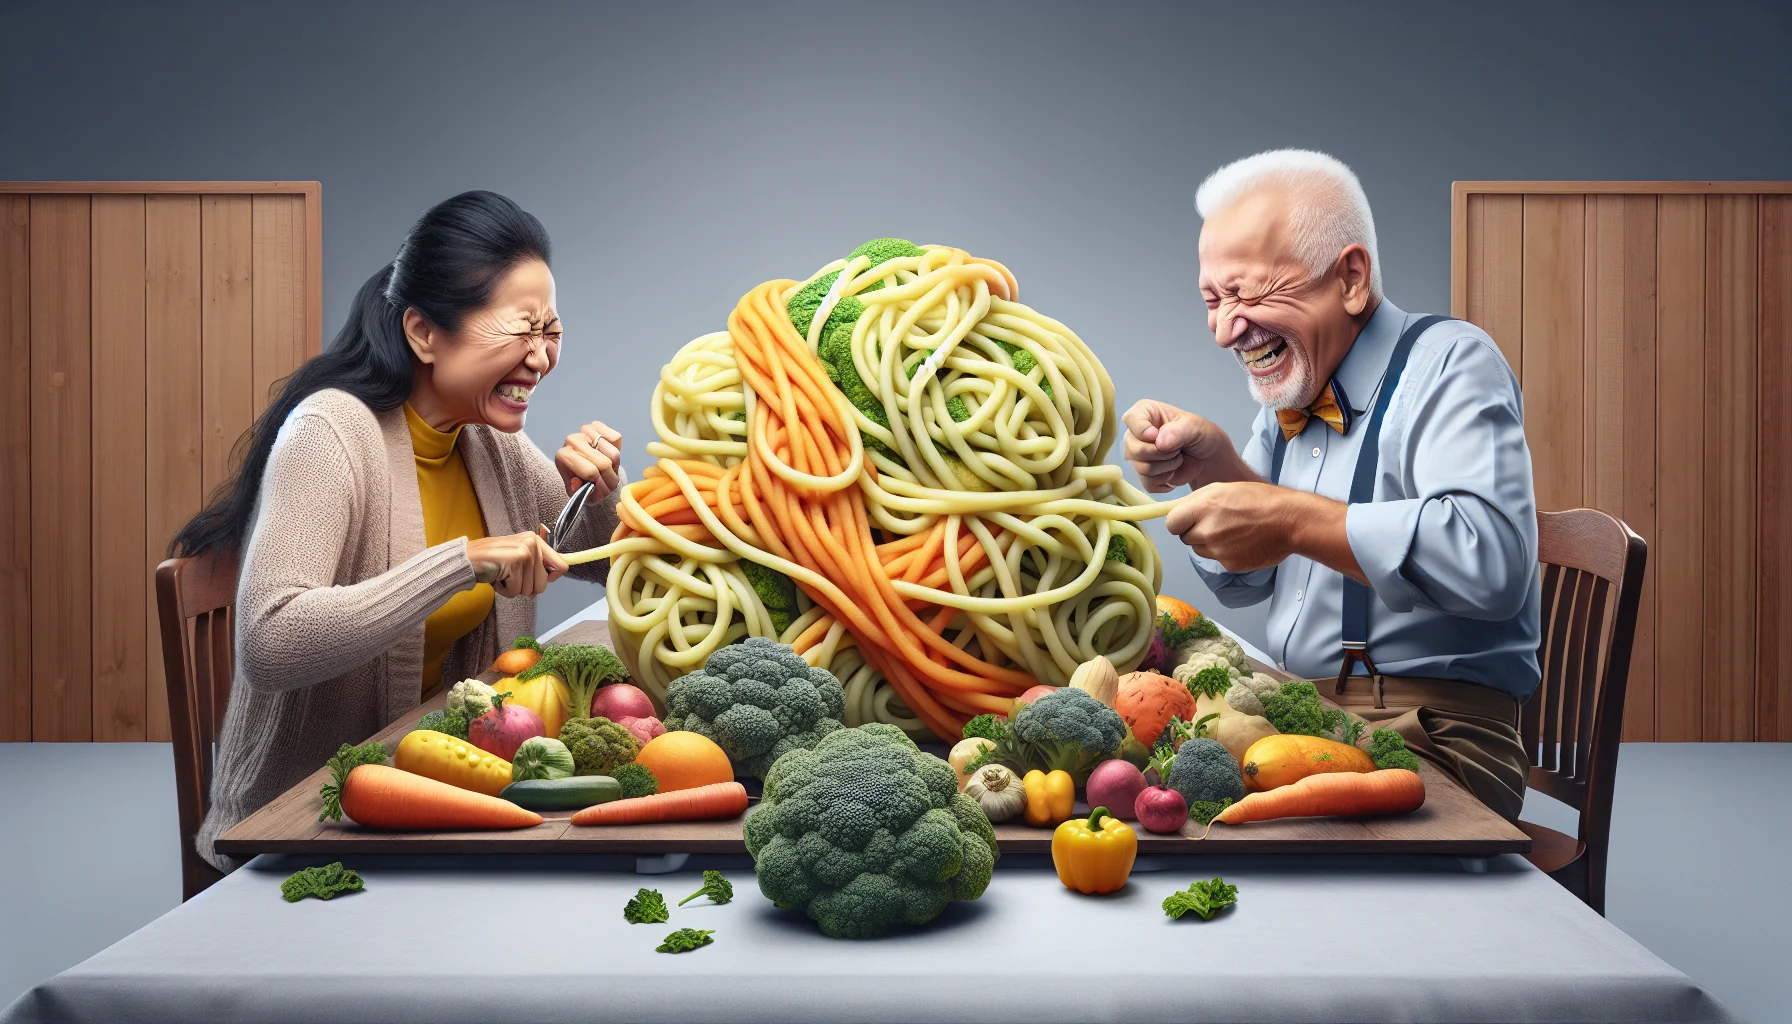 Create a light-hearted, realistic depiction of three elderly individuals having a unique dining experience that puts a humorous spin on the concept of eating healthy. The first, a South Asian woman, trying to untangle a confused mass of spaghetti squash, looking both bemused and determined. Sitting opposite her is an elderly Hispanic man, chuckling as he wrestles with an oversized, misshapen carrot. At the end of their table, a Caucasian gentleman is laughing heartily while examining a giant broccoli as if it were a magnifying glass. Their table is laden with other fresh, colorful produce, a symbol of their commitment to a heart-healthy and diabetic-friendly diet.